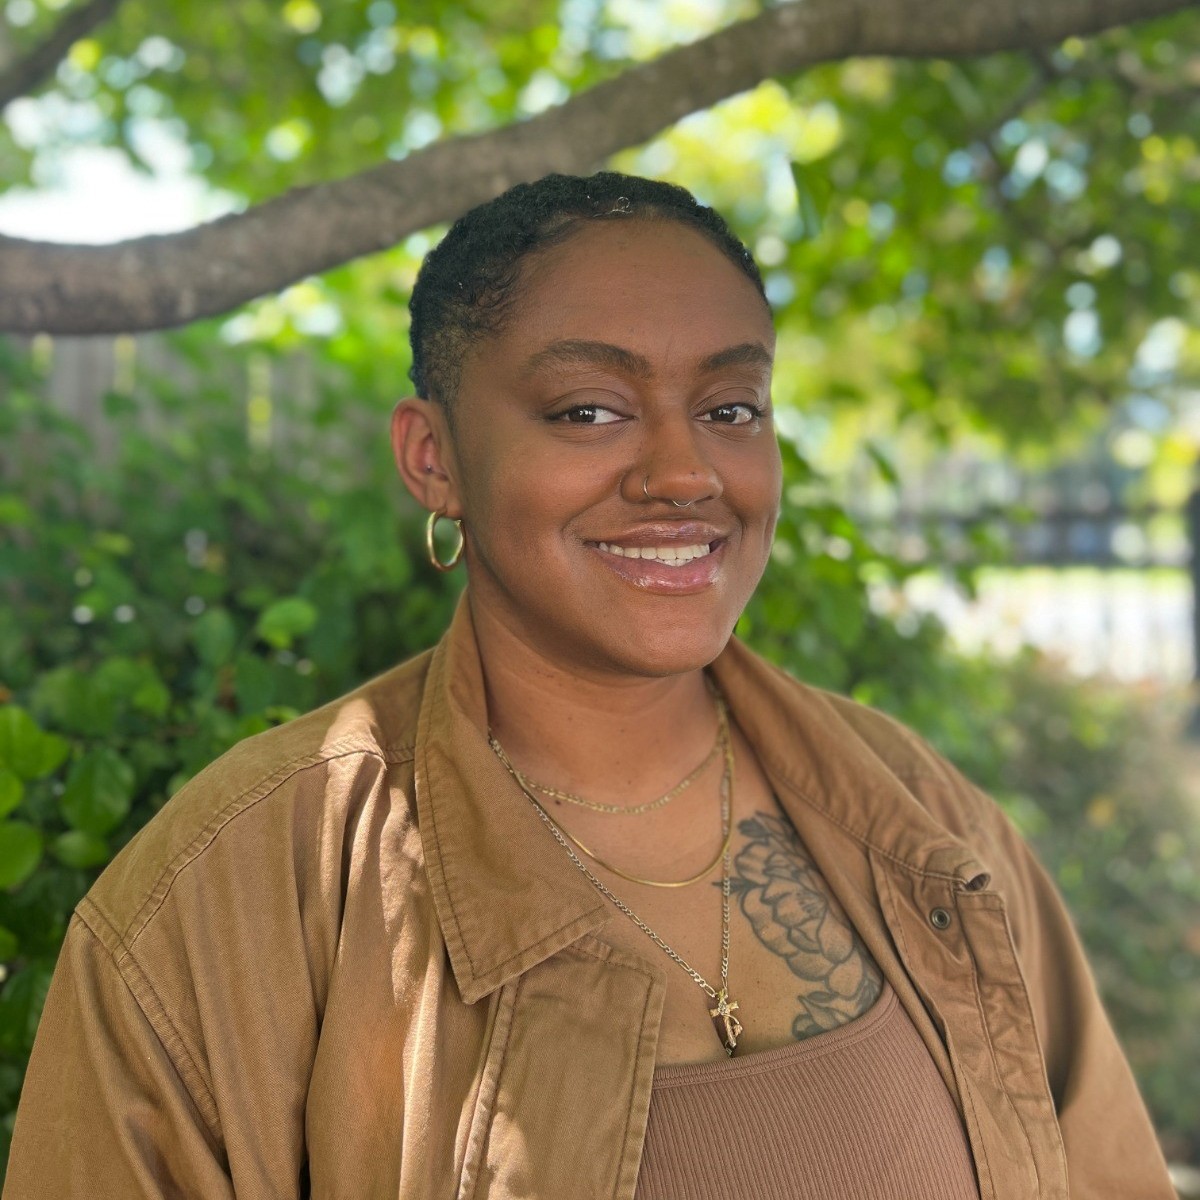 “It means freedom, it means I’ll stand out... children that look like me can do anything and know it’s ok to take up space.” - Destiny D., BS in Computer Science candidate. From the Navy to progressing her career in tech, Destiny's journey embodies resilience and empowerment.